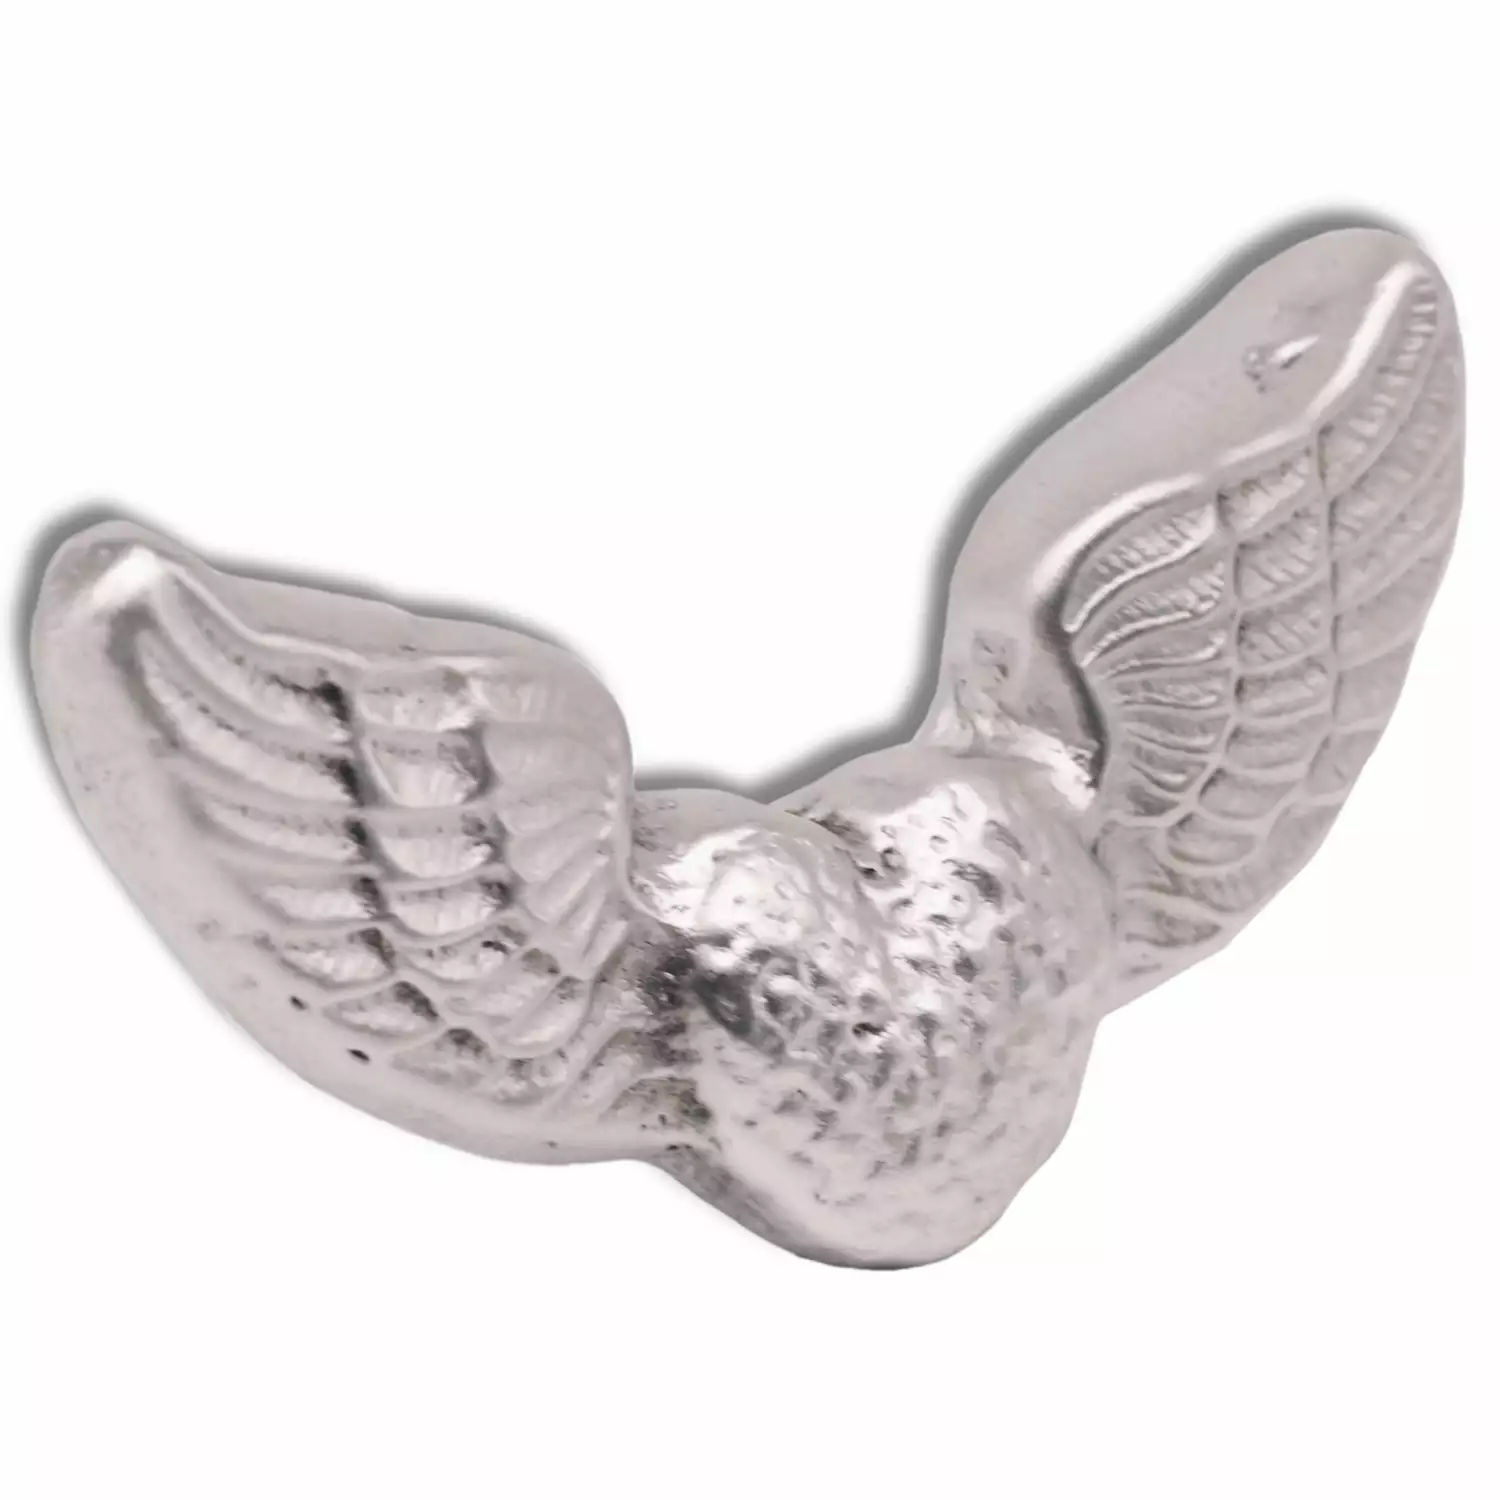 2 Troy Ounce Winged Heart (5)